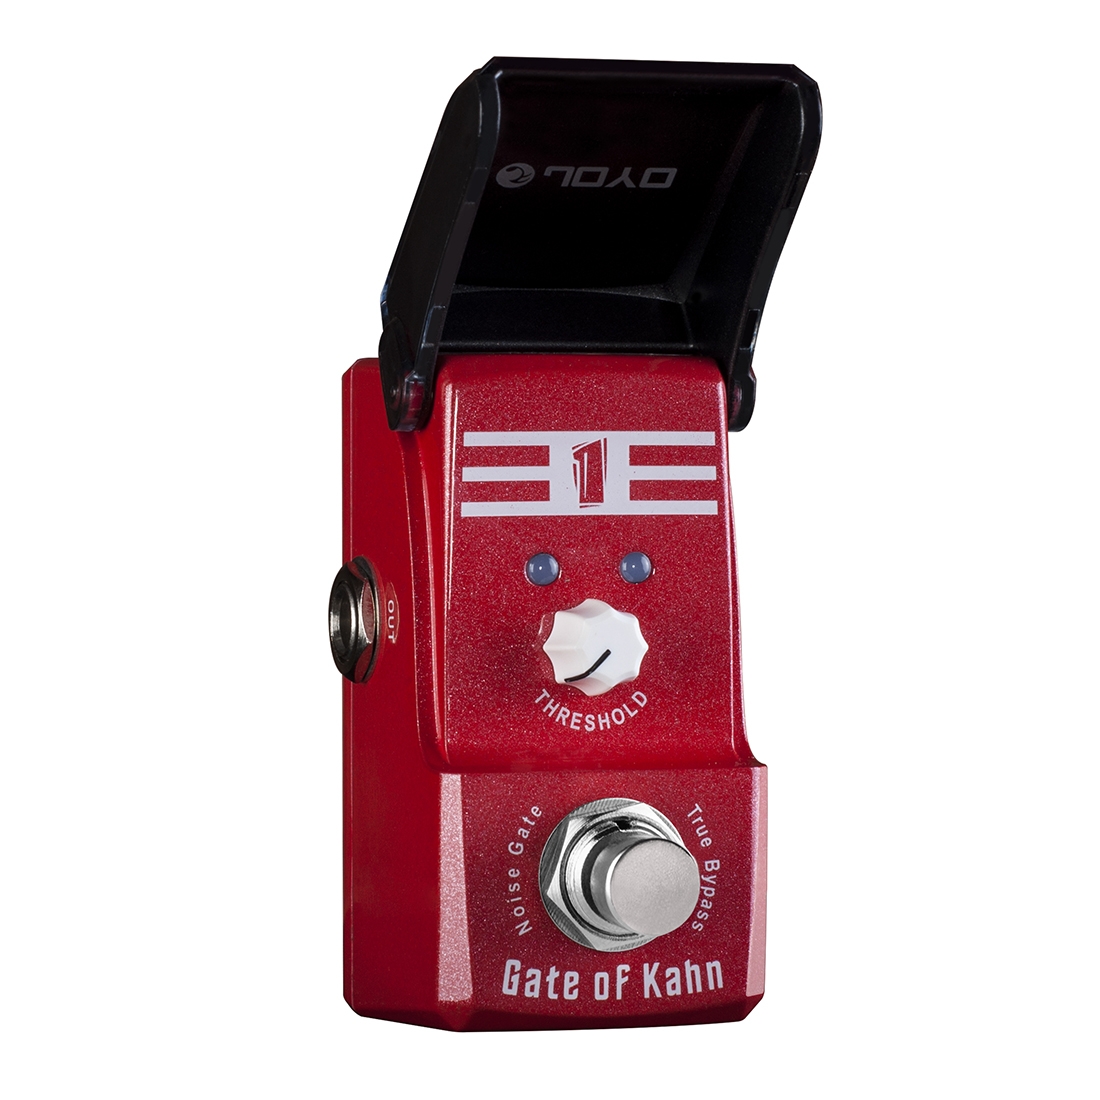 JOYO JF-324 Gate of Kahn Noise Gate Mini Electric Bass Guitar Effect Pedal with Knob Guard Reduce Extra Noise